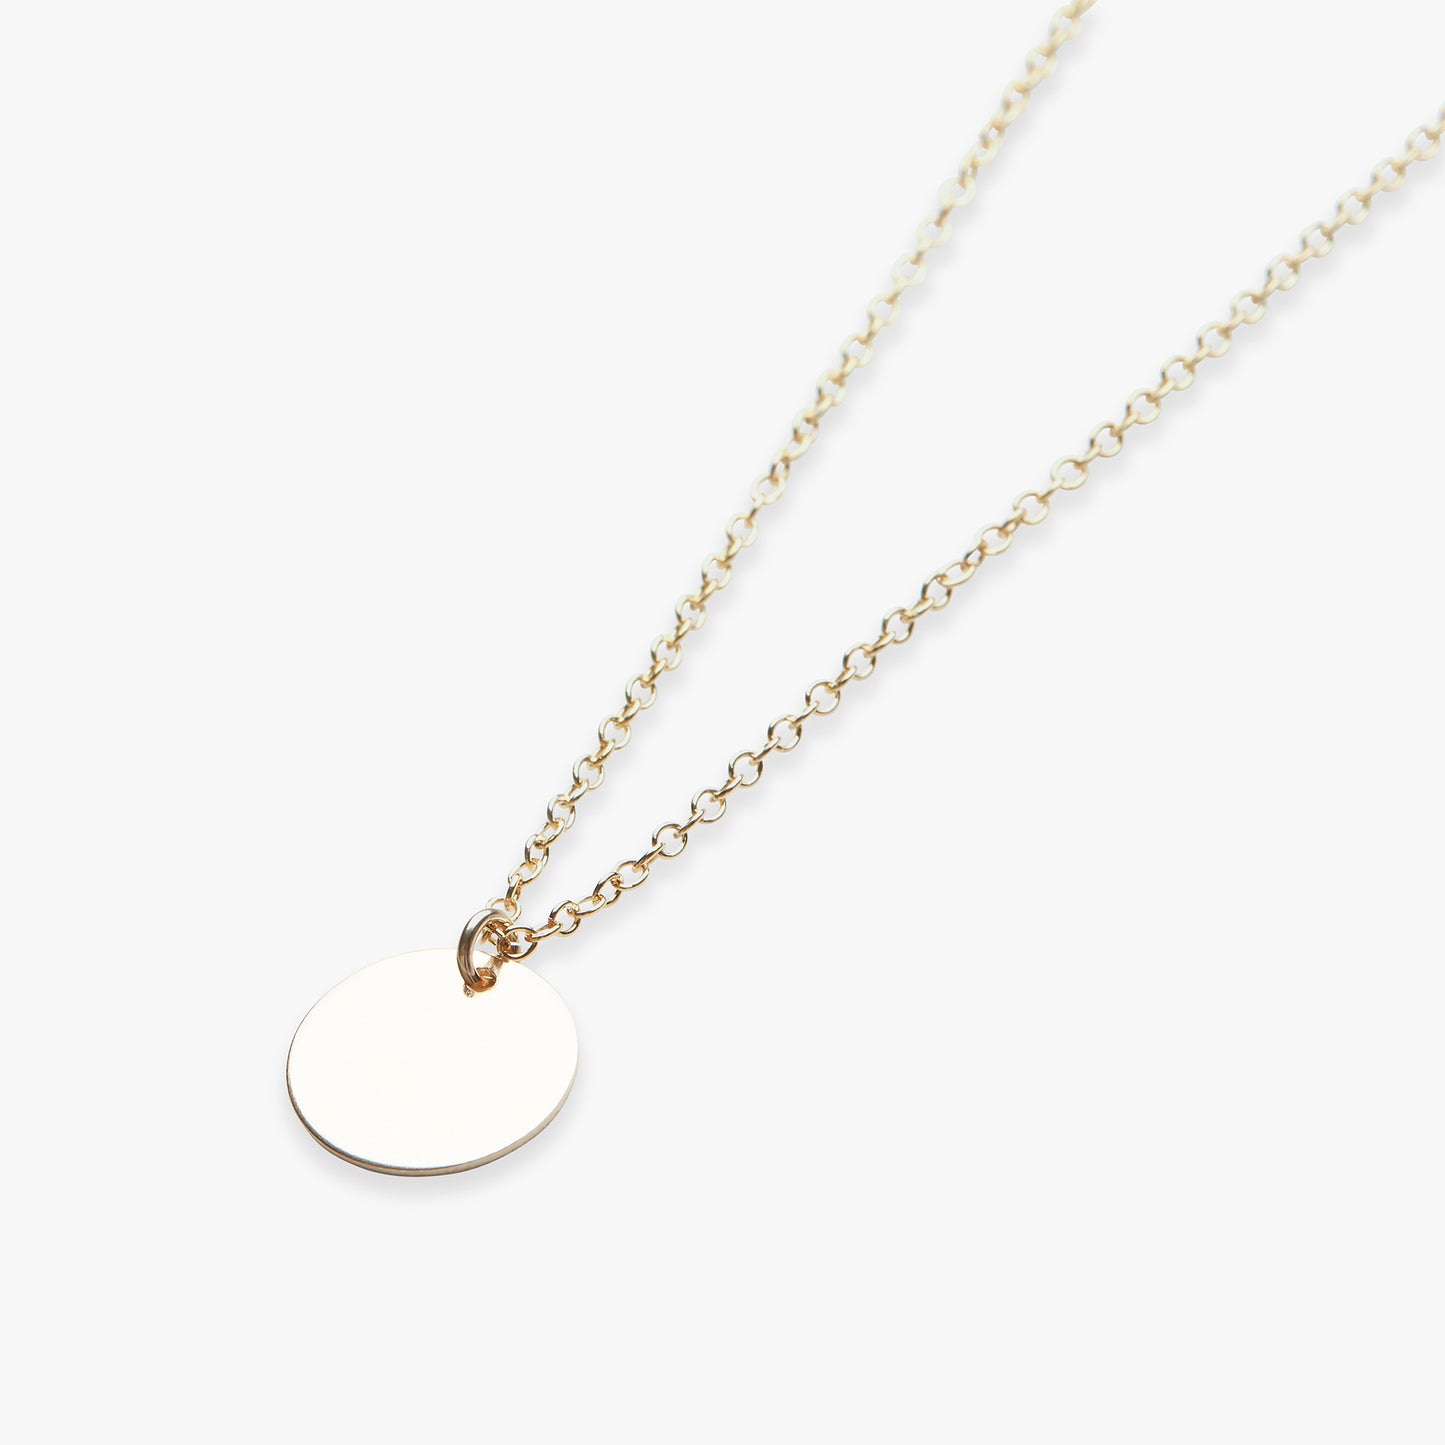 Laad afbeelding in Galerijviewer, Big coin ketting gold filled
